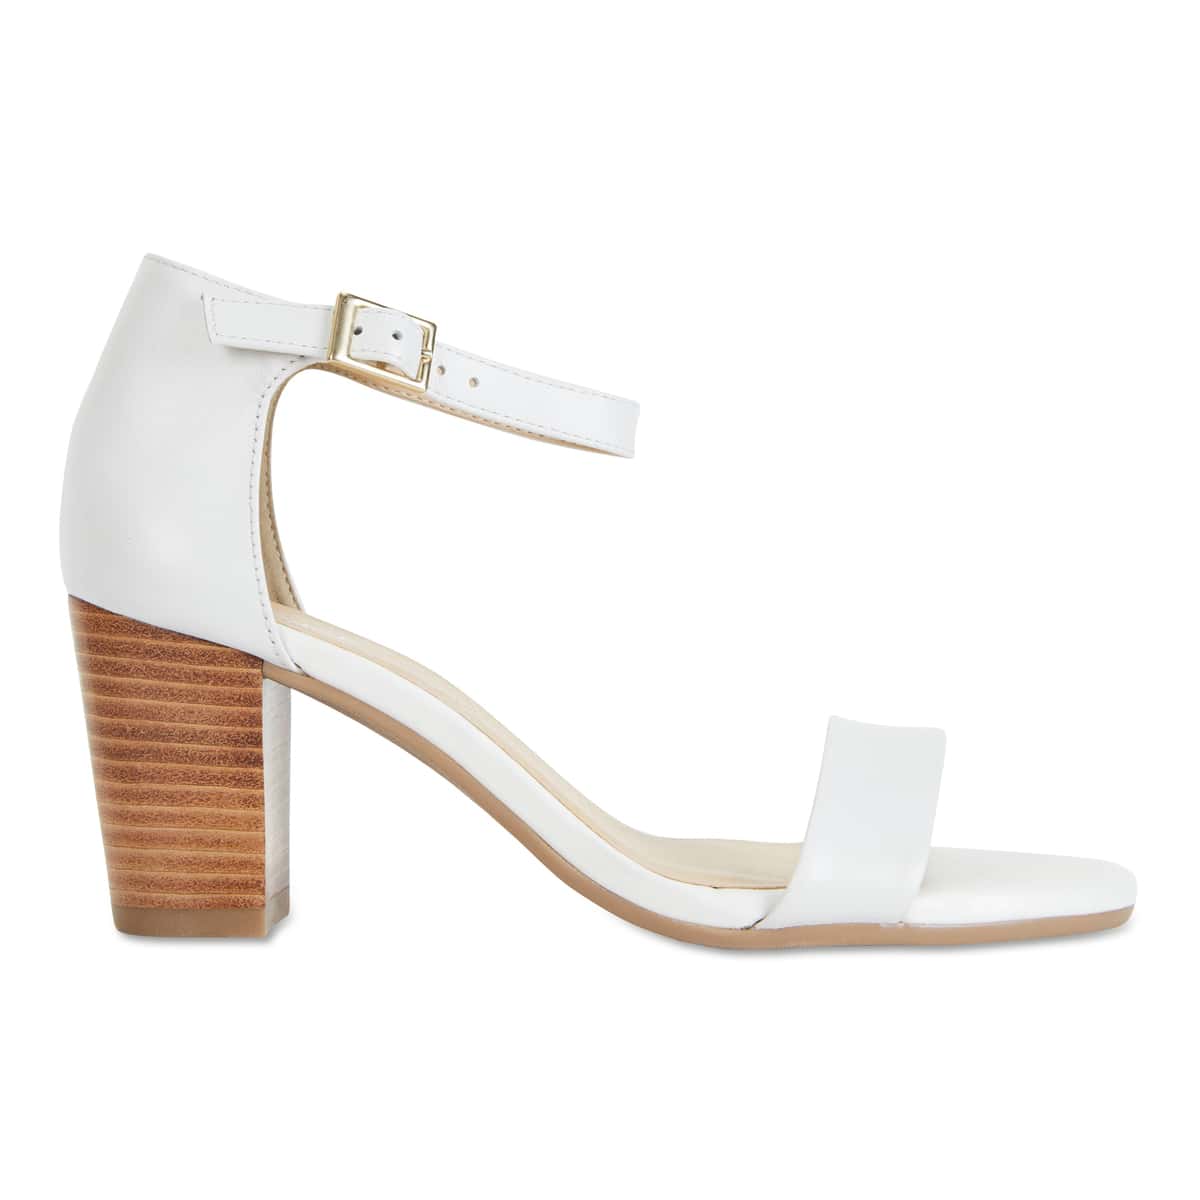 Beyond Heel in White Leather